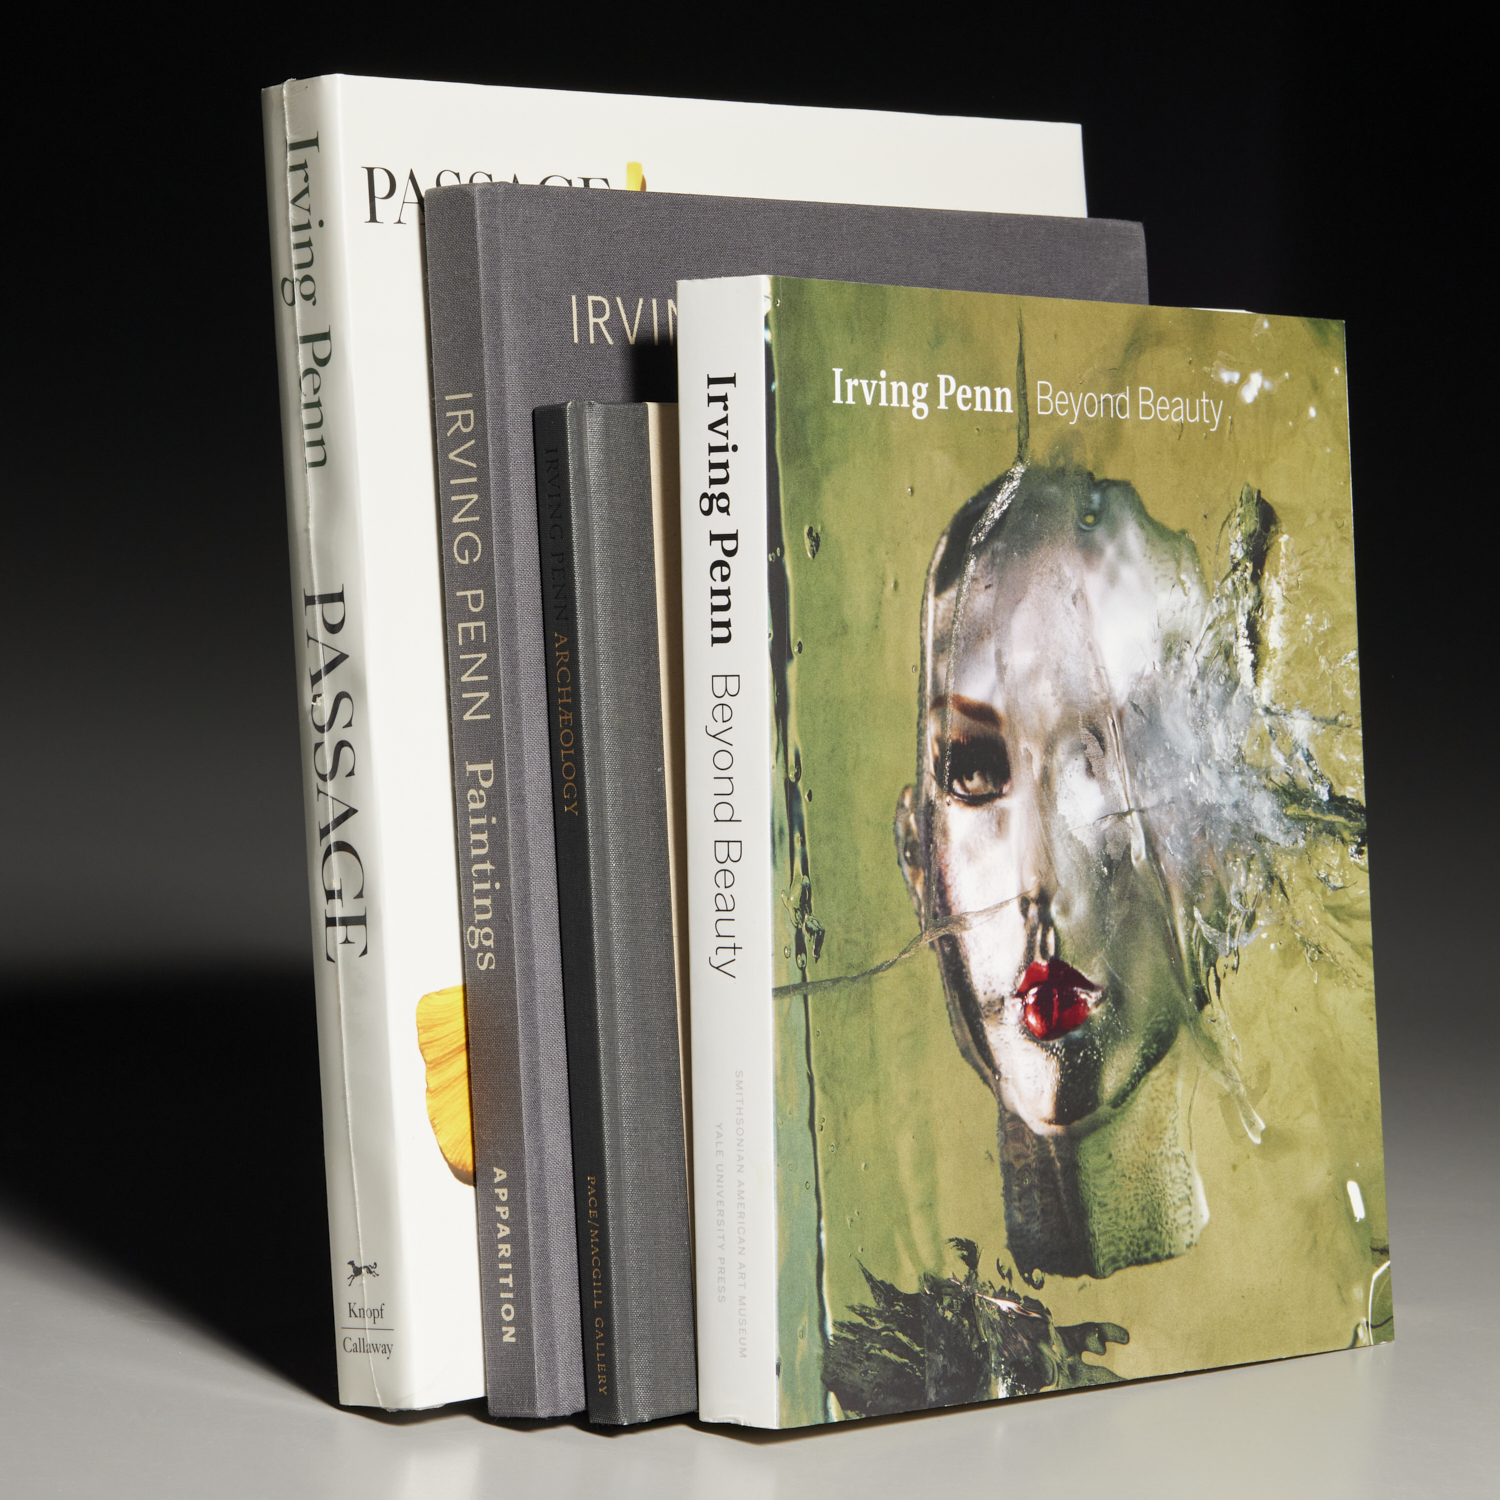 IRVING PENN, (4) VOLUMES Includes: